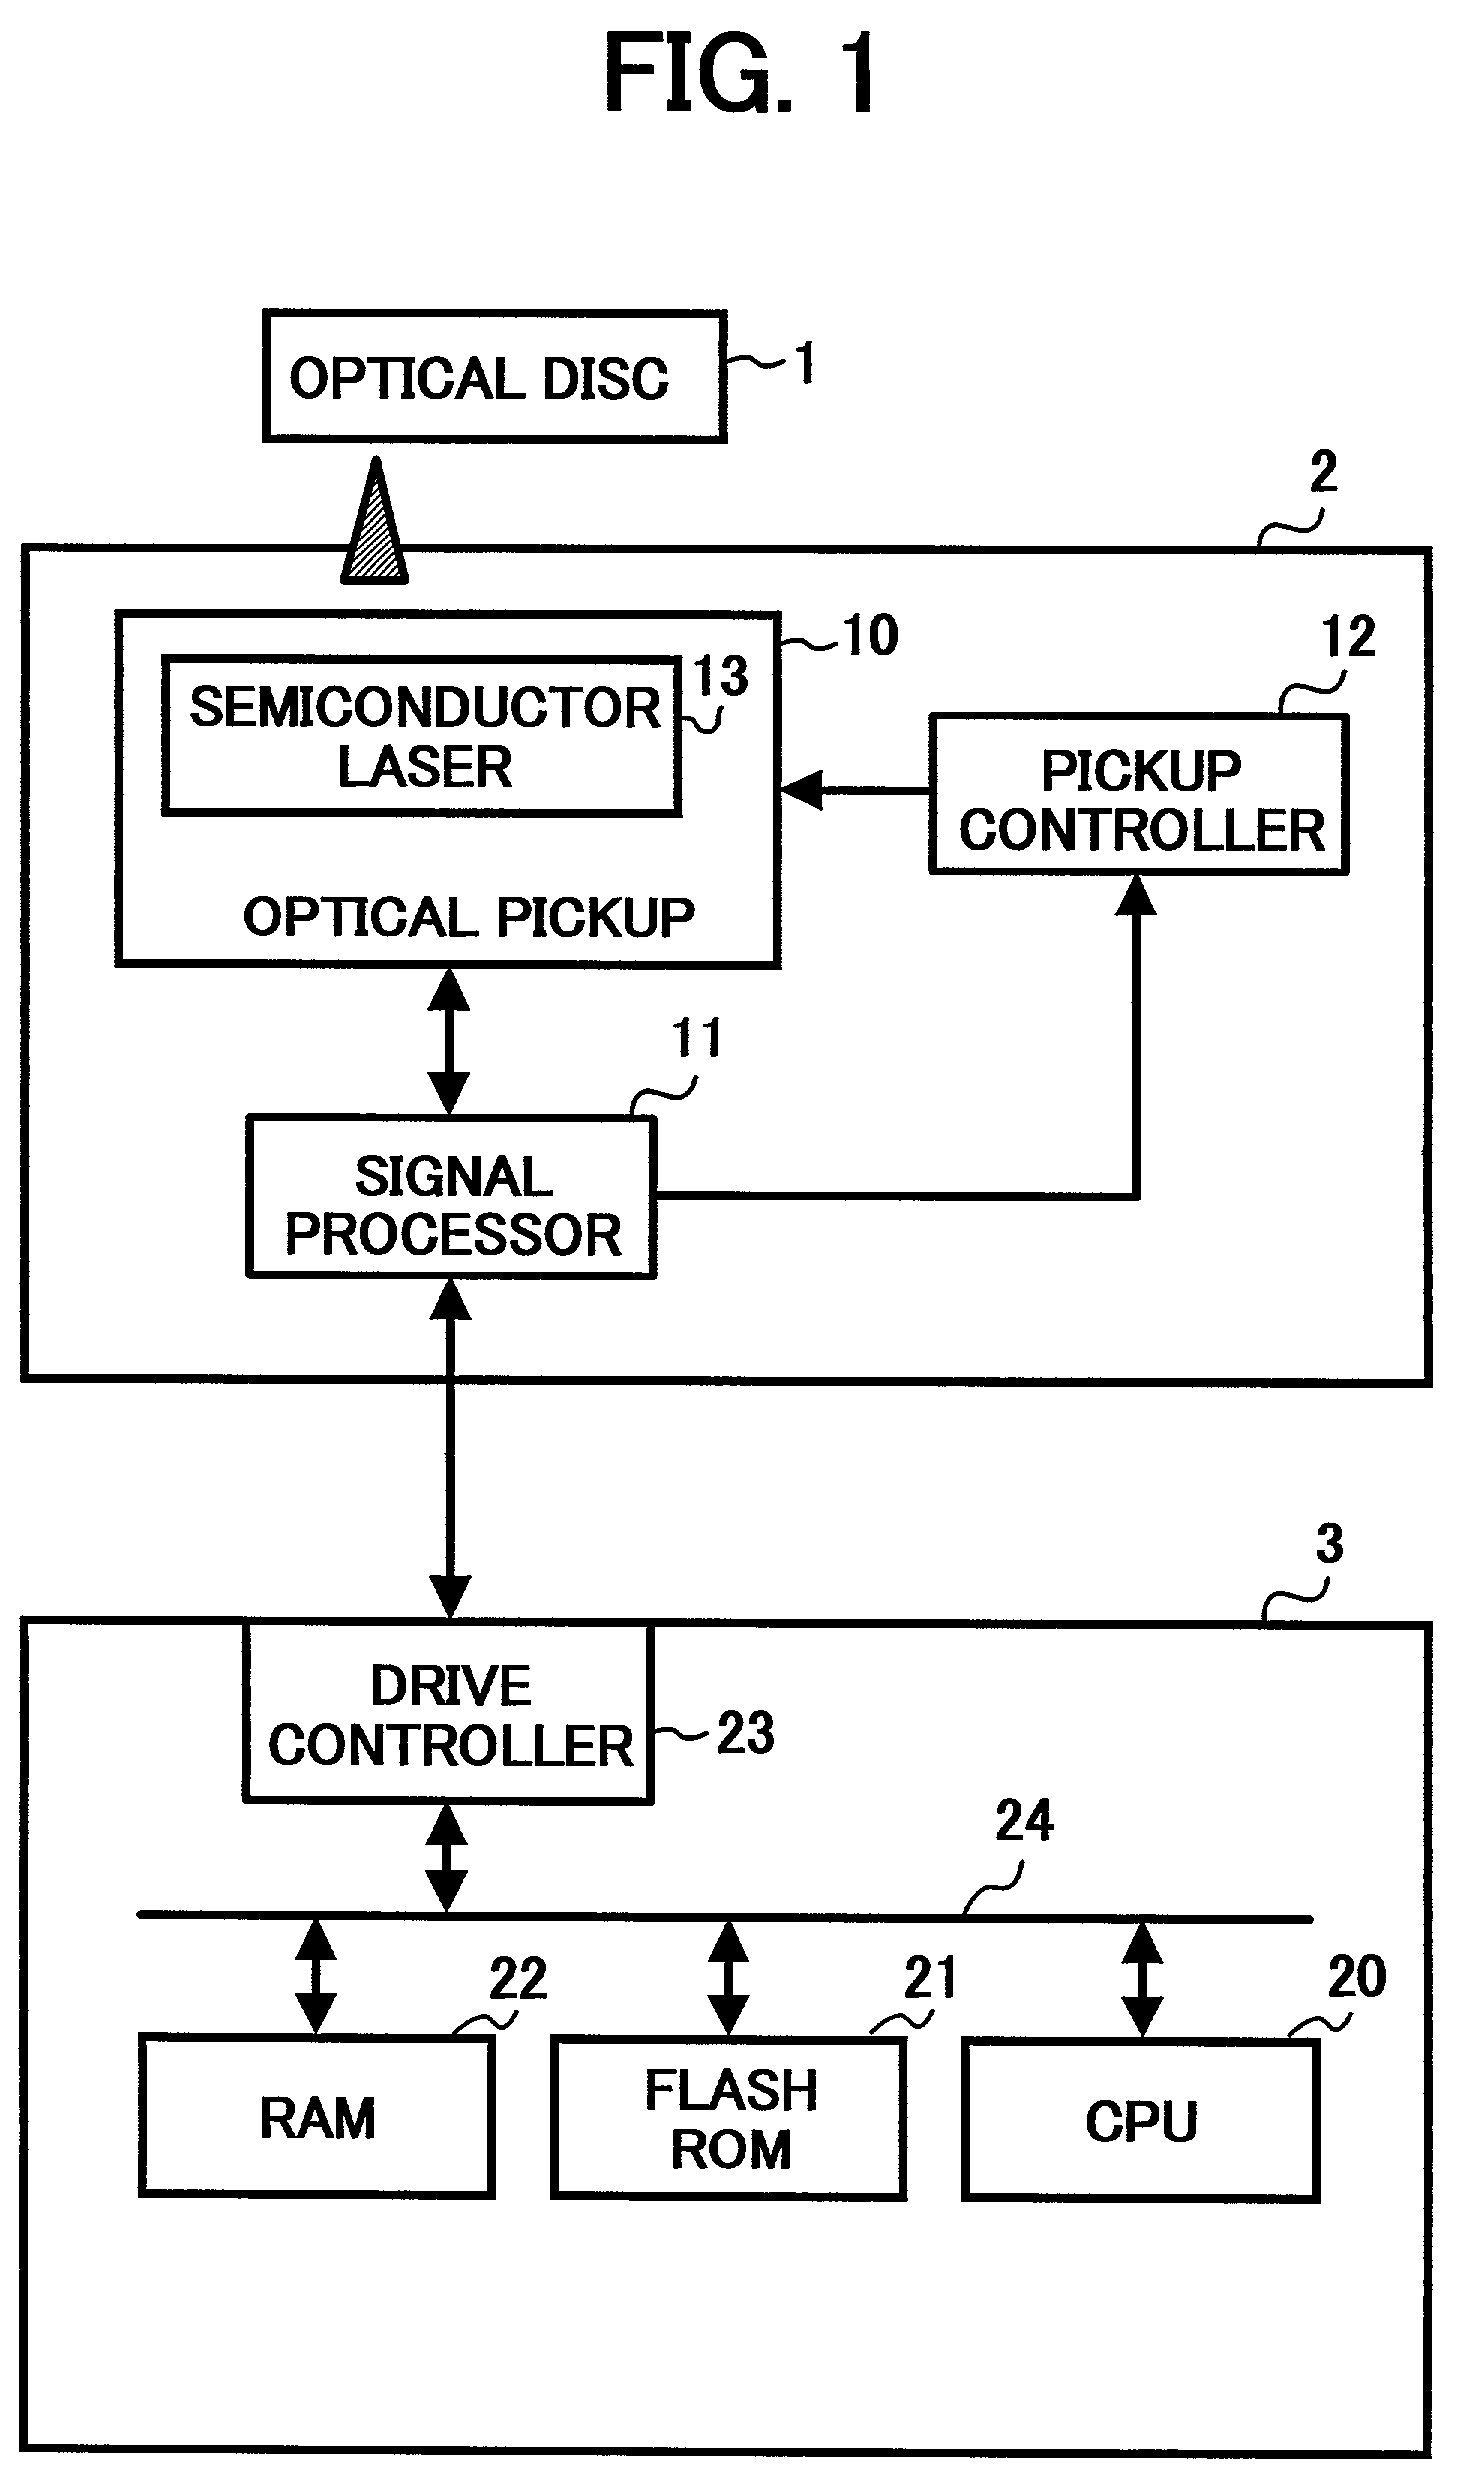 Formatting of phase-change optical disc for improved signal characteristics